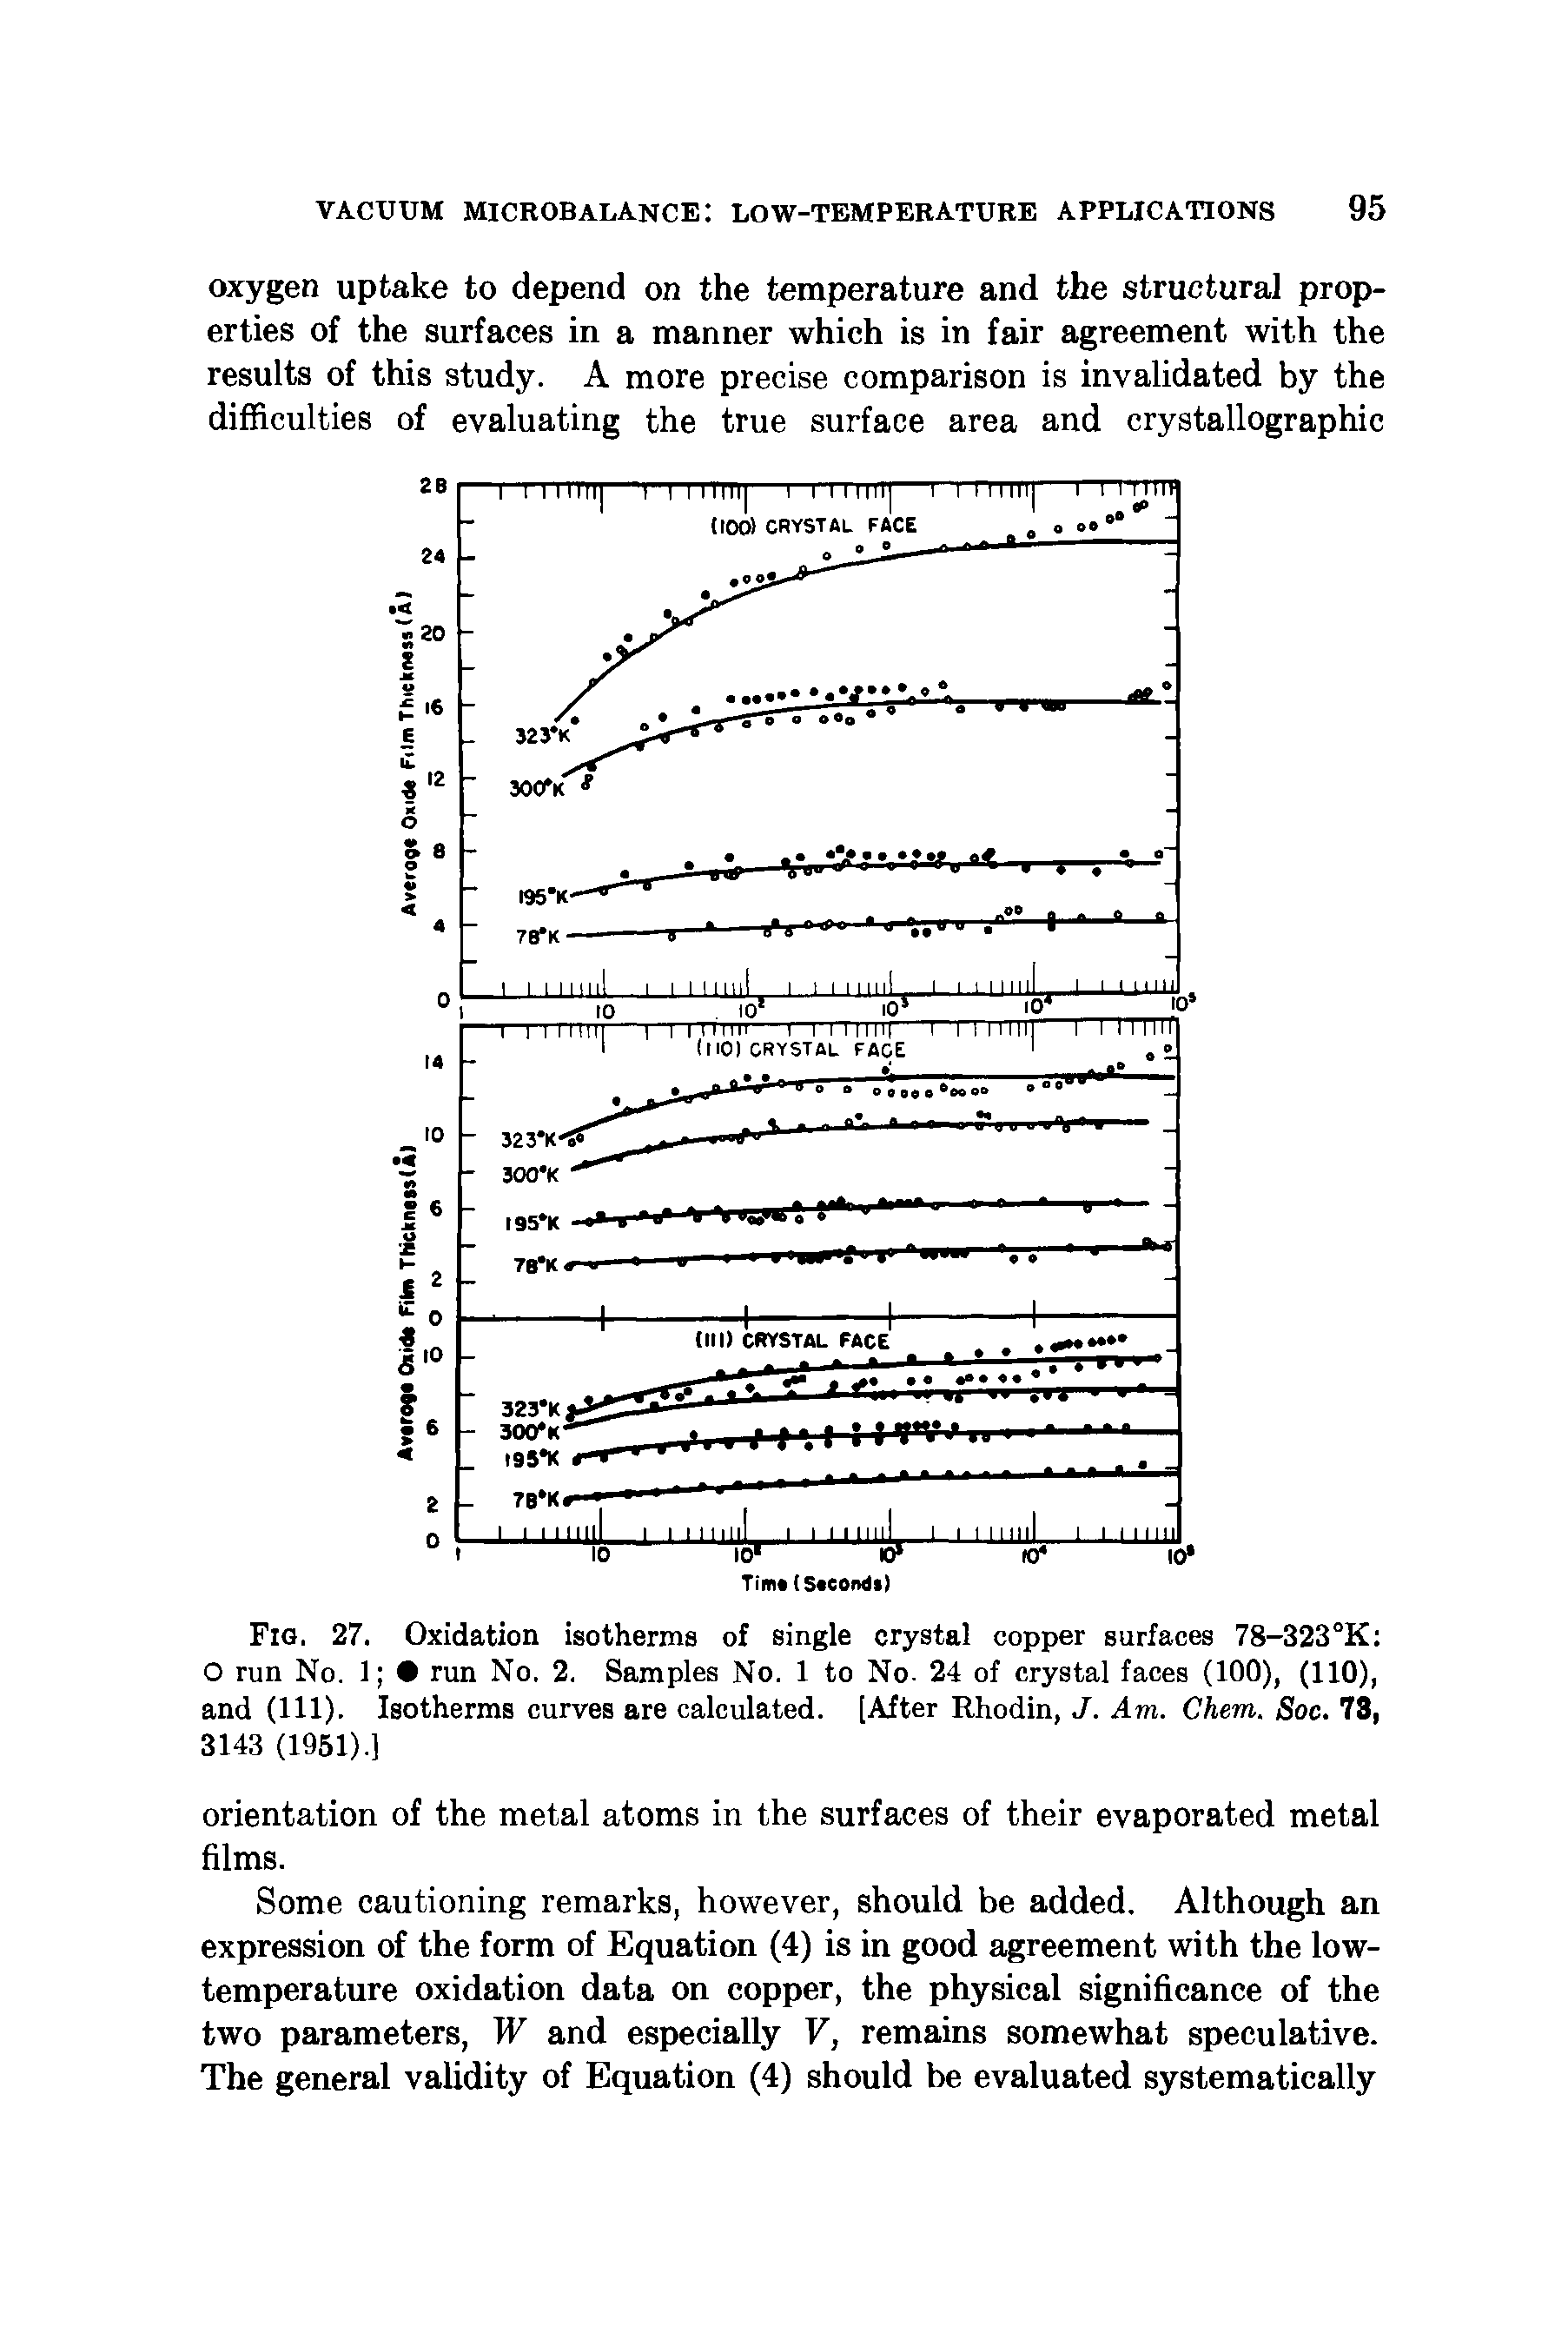 Fig. 27. Oxidation isotherms of single crystal copper surfaces 78-323°K O run No. 1 run No. 2. Samples No. 1 to No. 24 of crystal faces (100), (110), and (111). Isotherms curves are calculated. [After Rhodin, J. Am. Chem. Soc. 73, 3143 (1951).]...